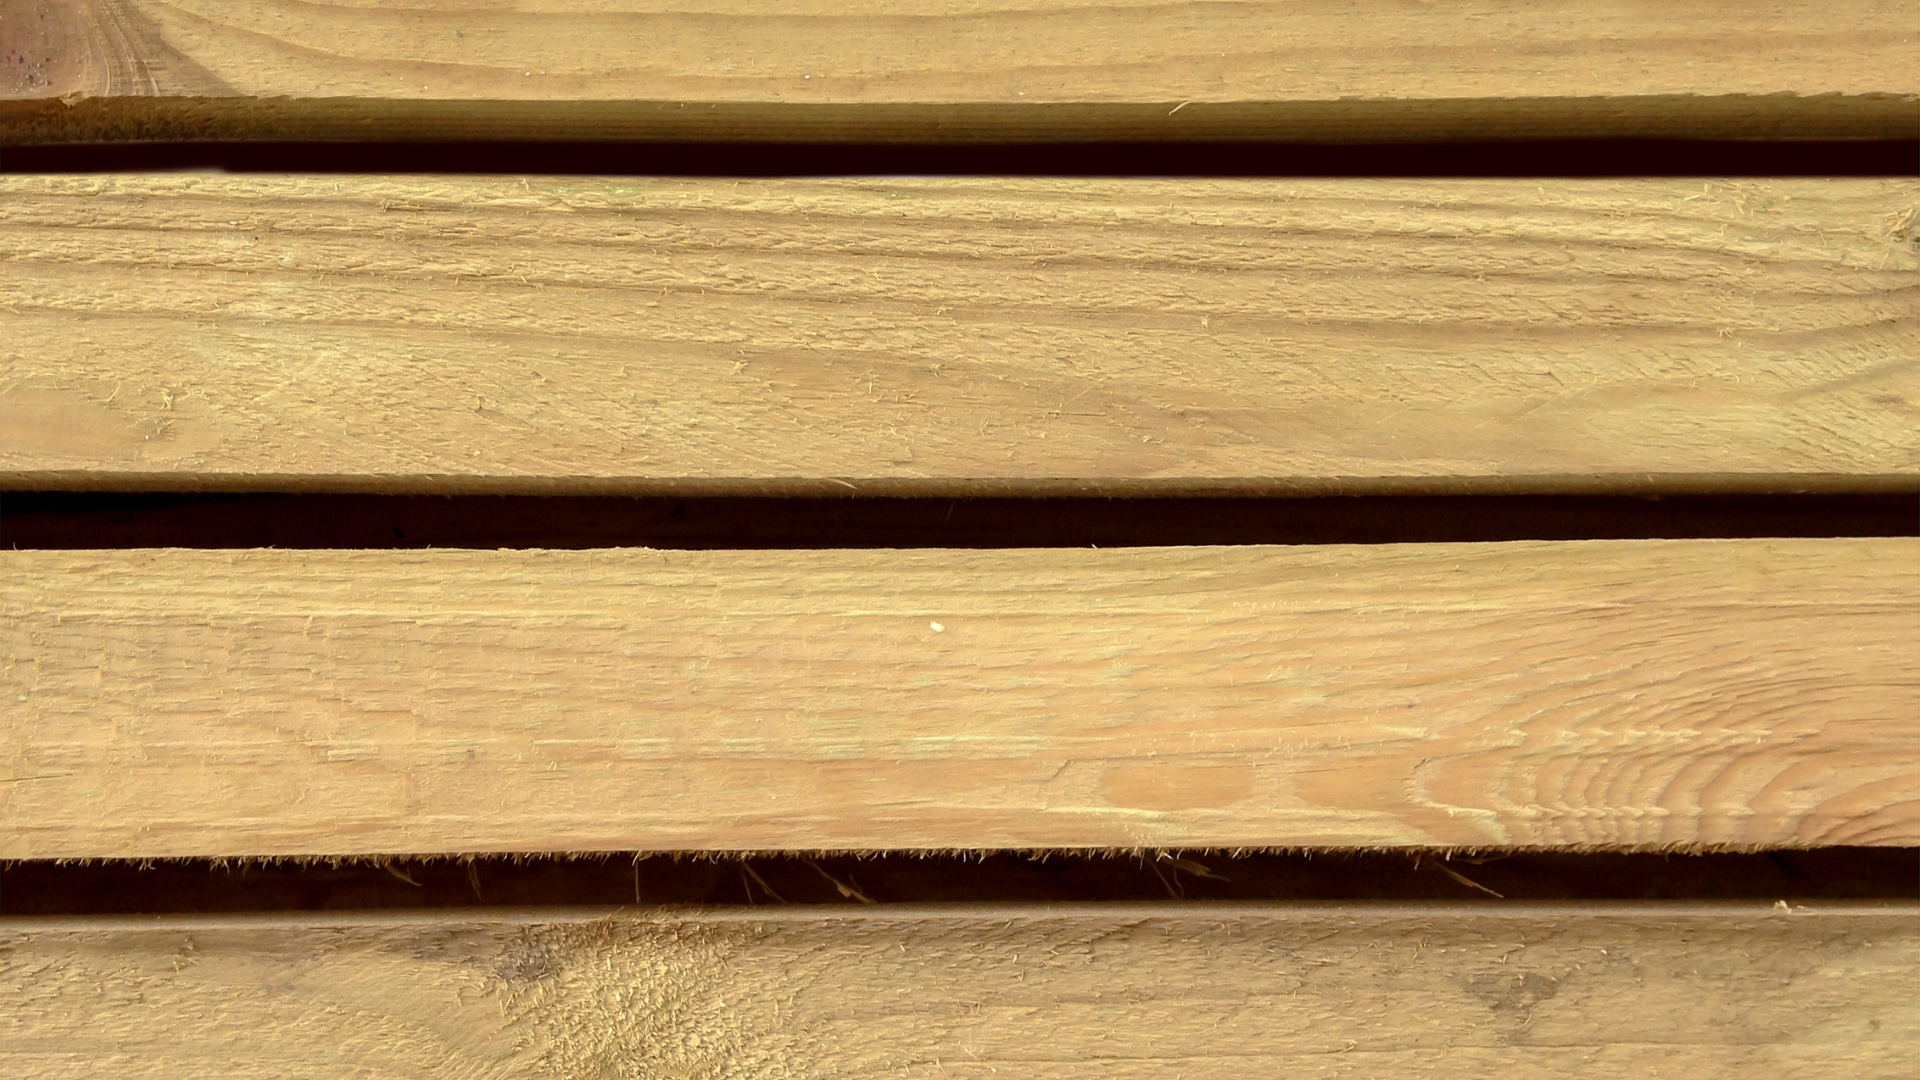 Close up of yellowed timber beams stacked on top of each other